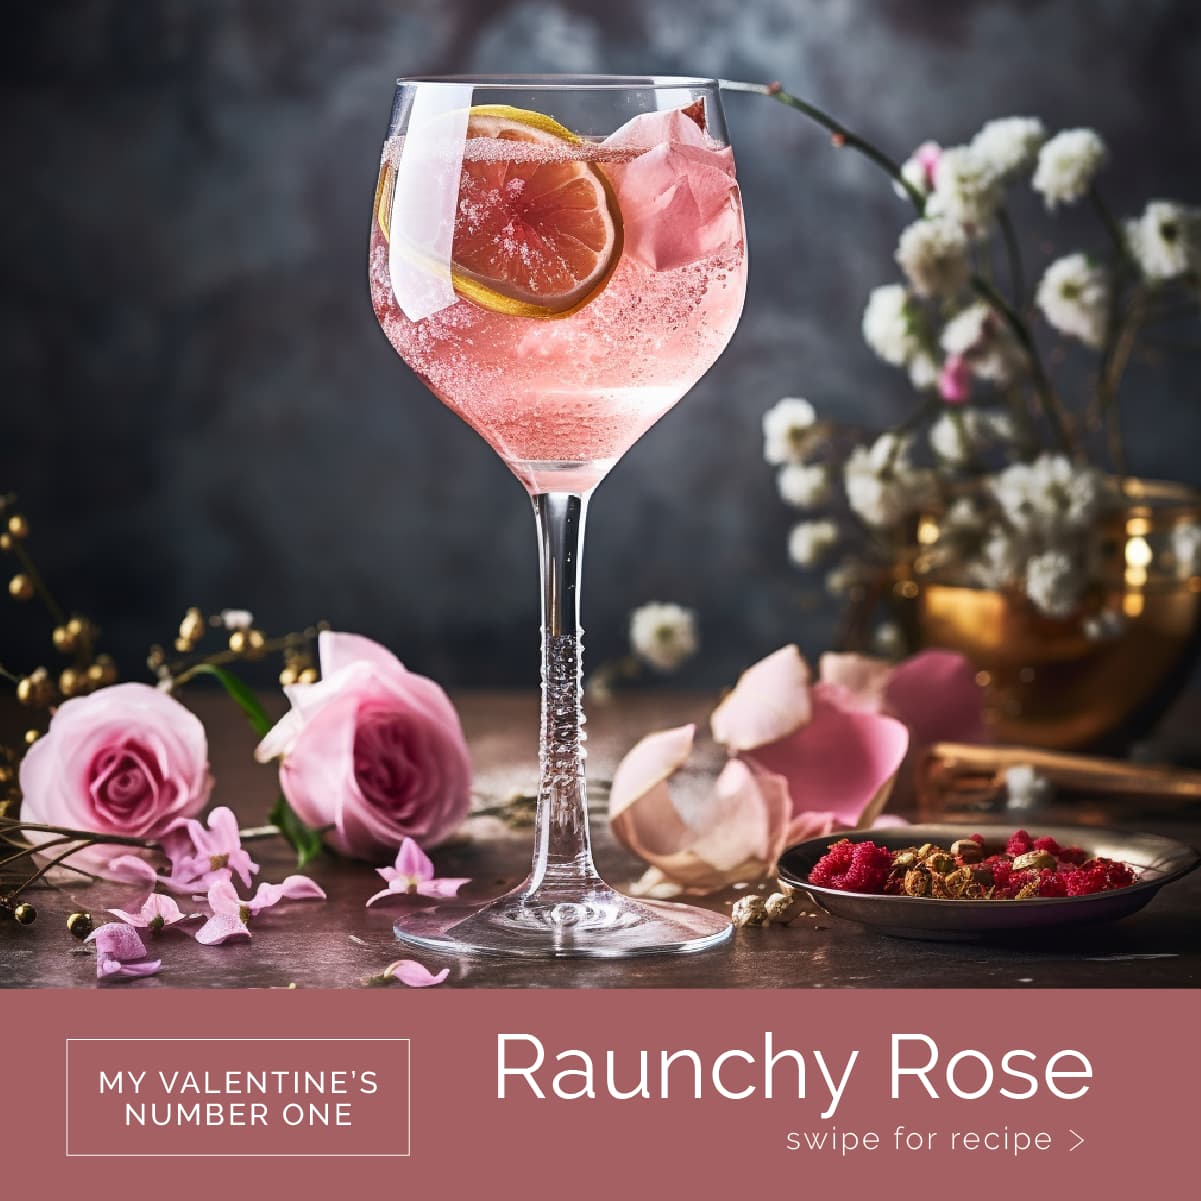 A Raunchy Rose cocktail